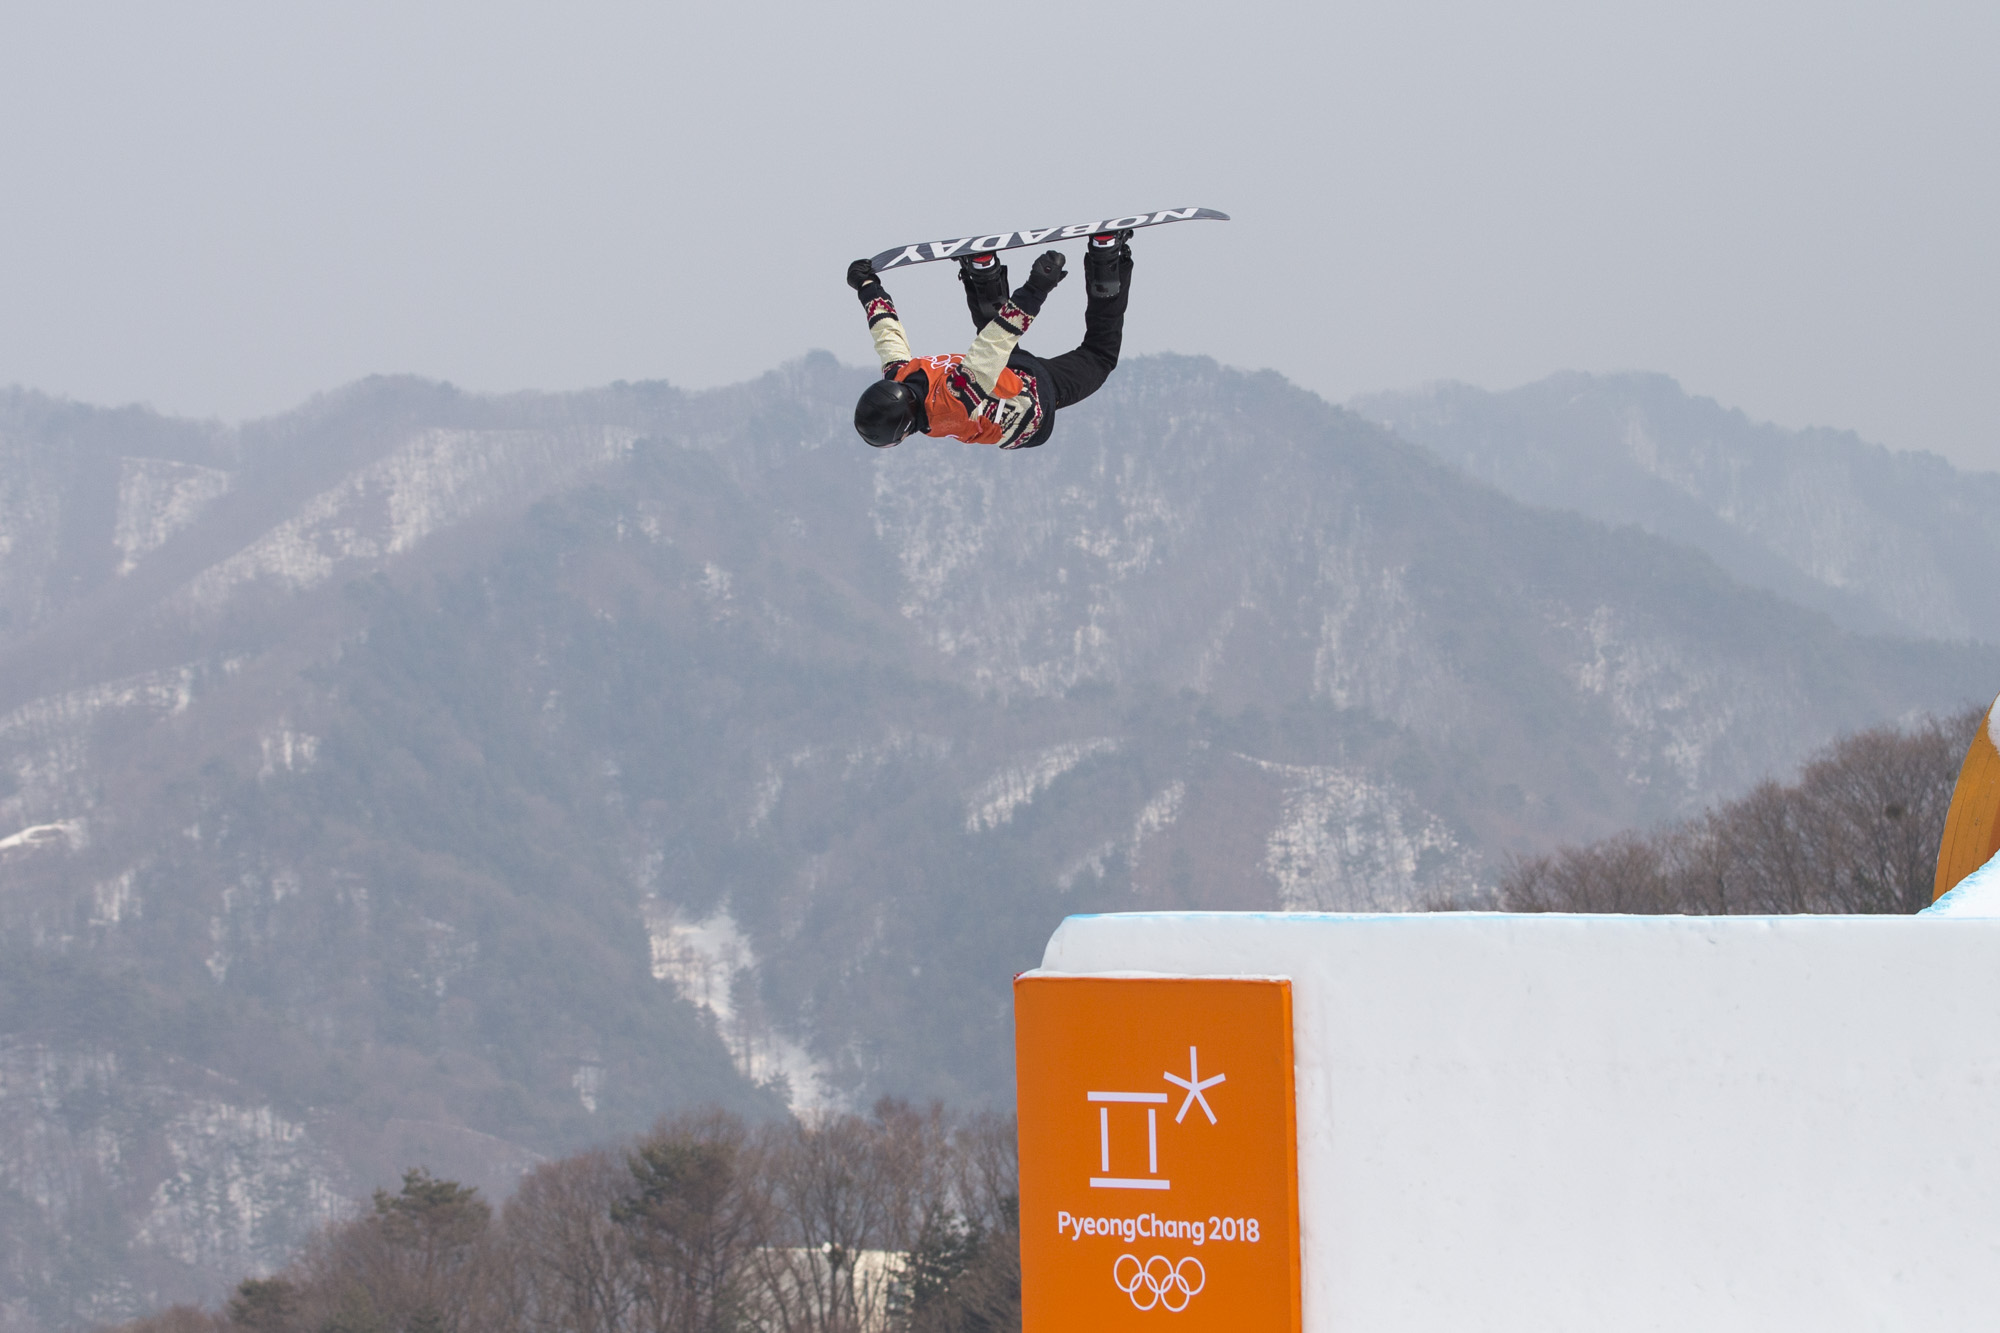 Team Canada Max Parrot PyeongChang 2018 Slopestyle Qualification